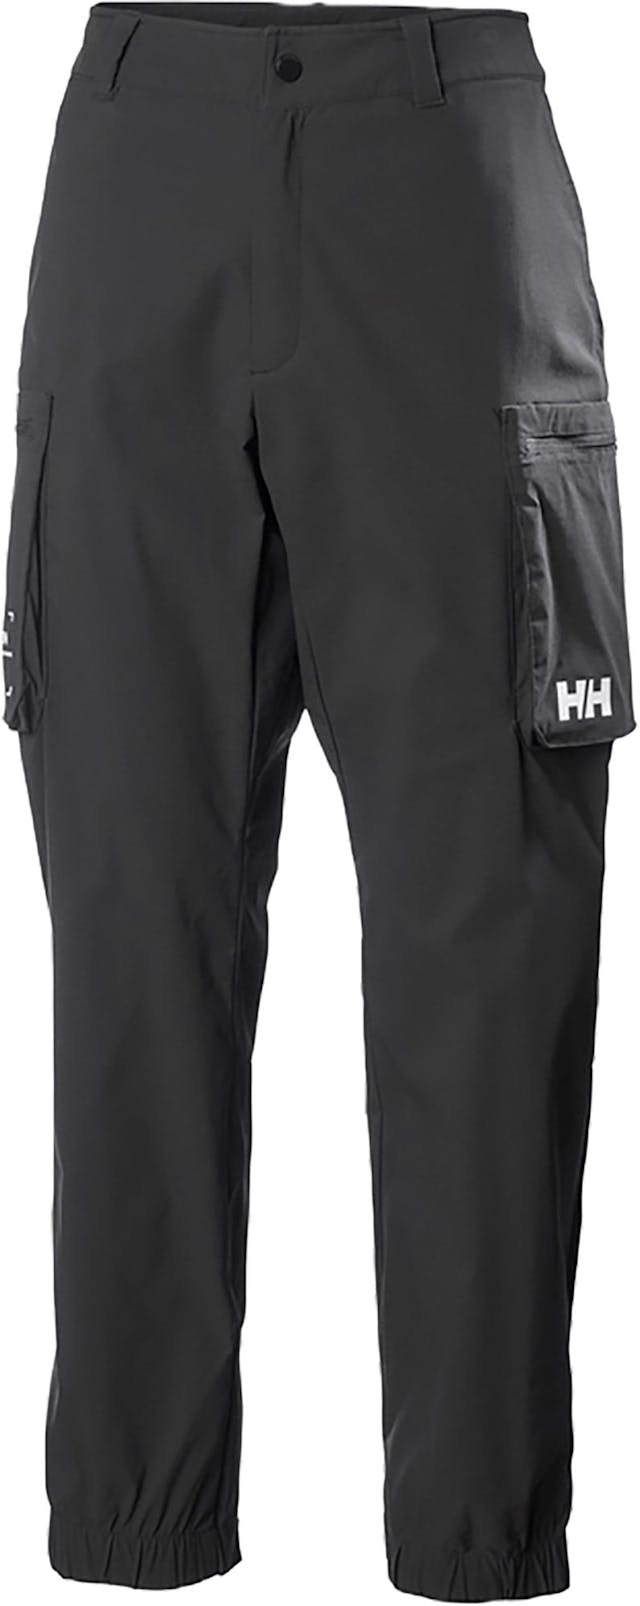 Product image for Move Quick-Dry Pant - Men's